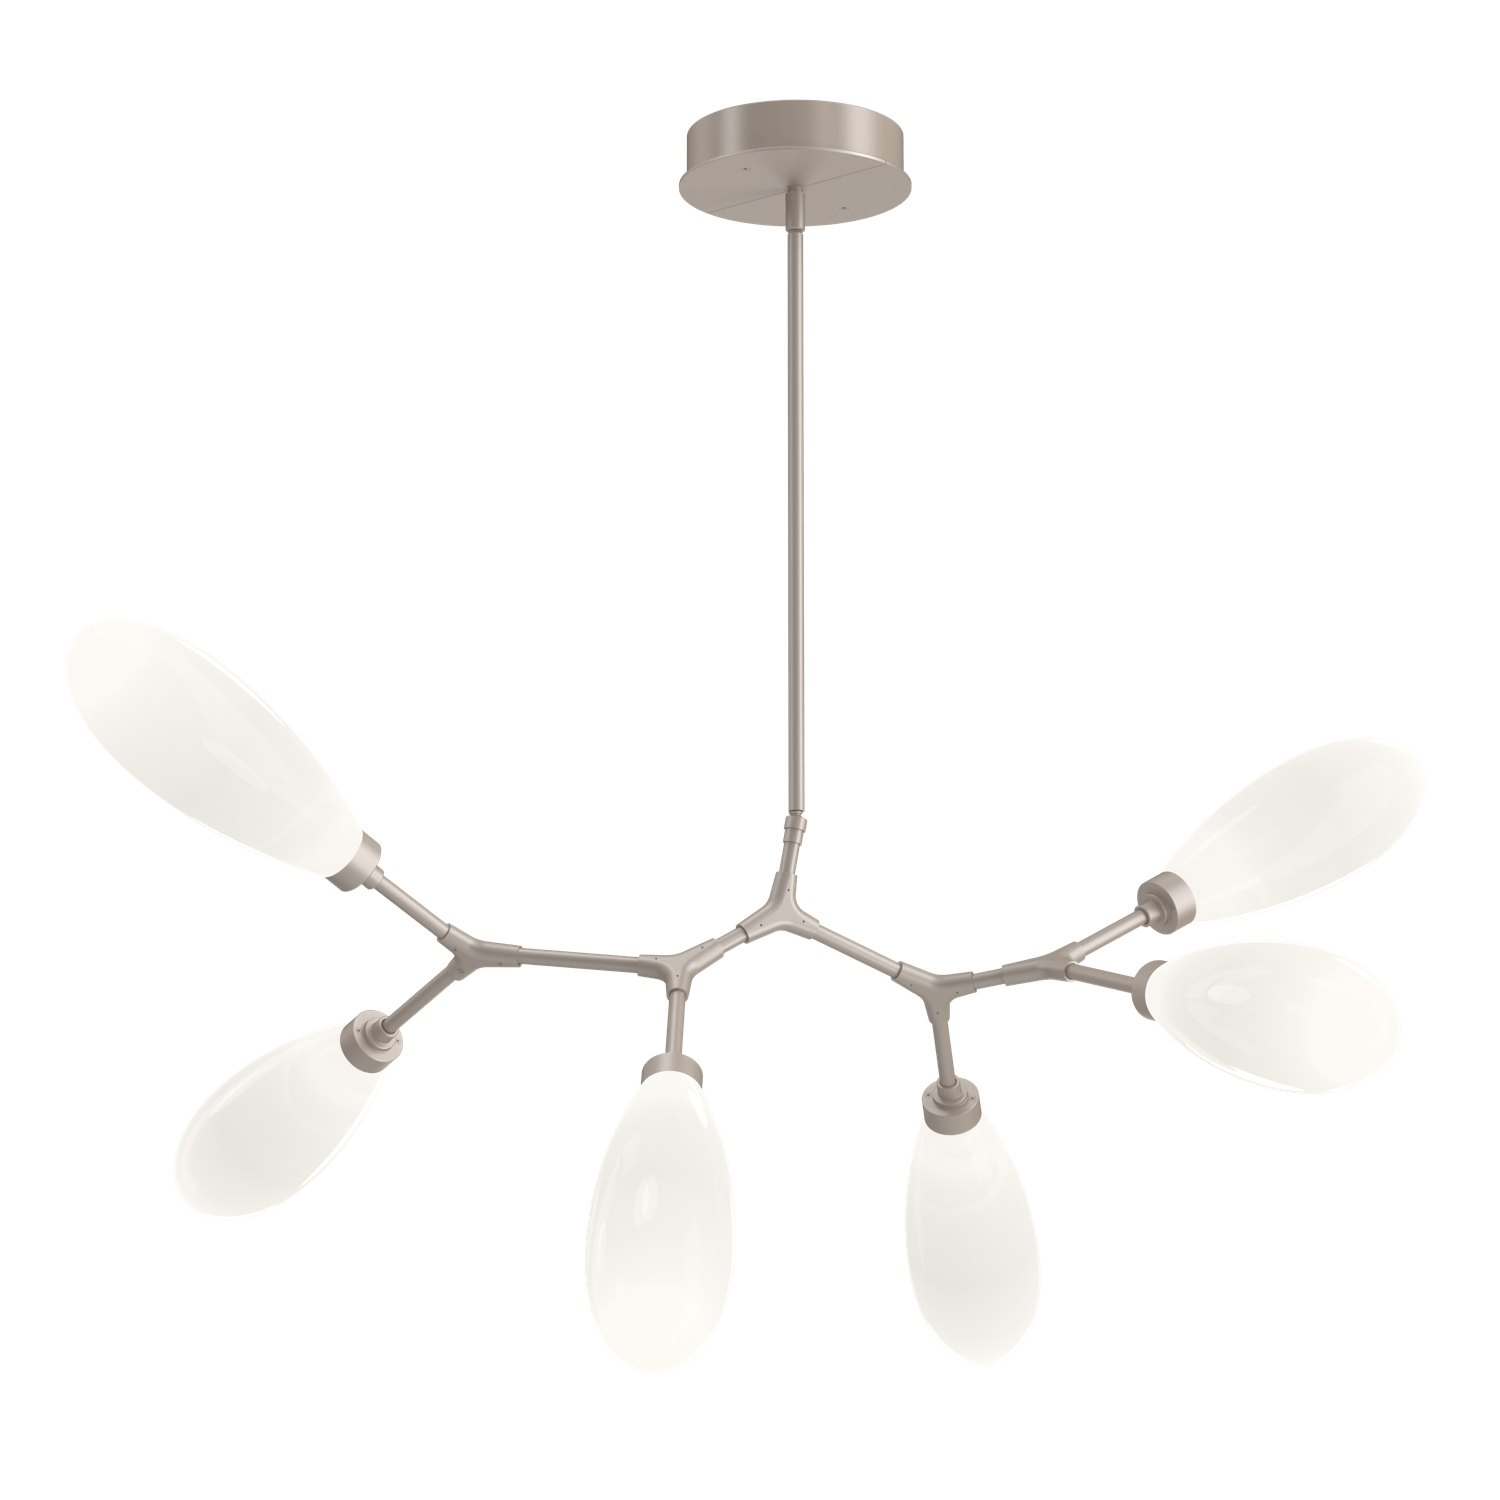 PLB0071-BA-BS-WL-LL-Hammerton-Studio-Fiori-6-light-organic-branch-chandelier-with-metallic-beige-silver-finish-and-opal-white-glass-shades-and-LED-lamping